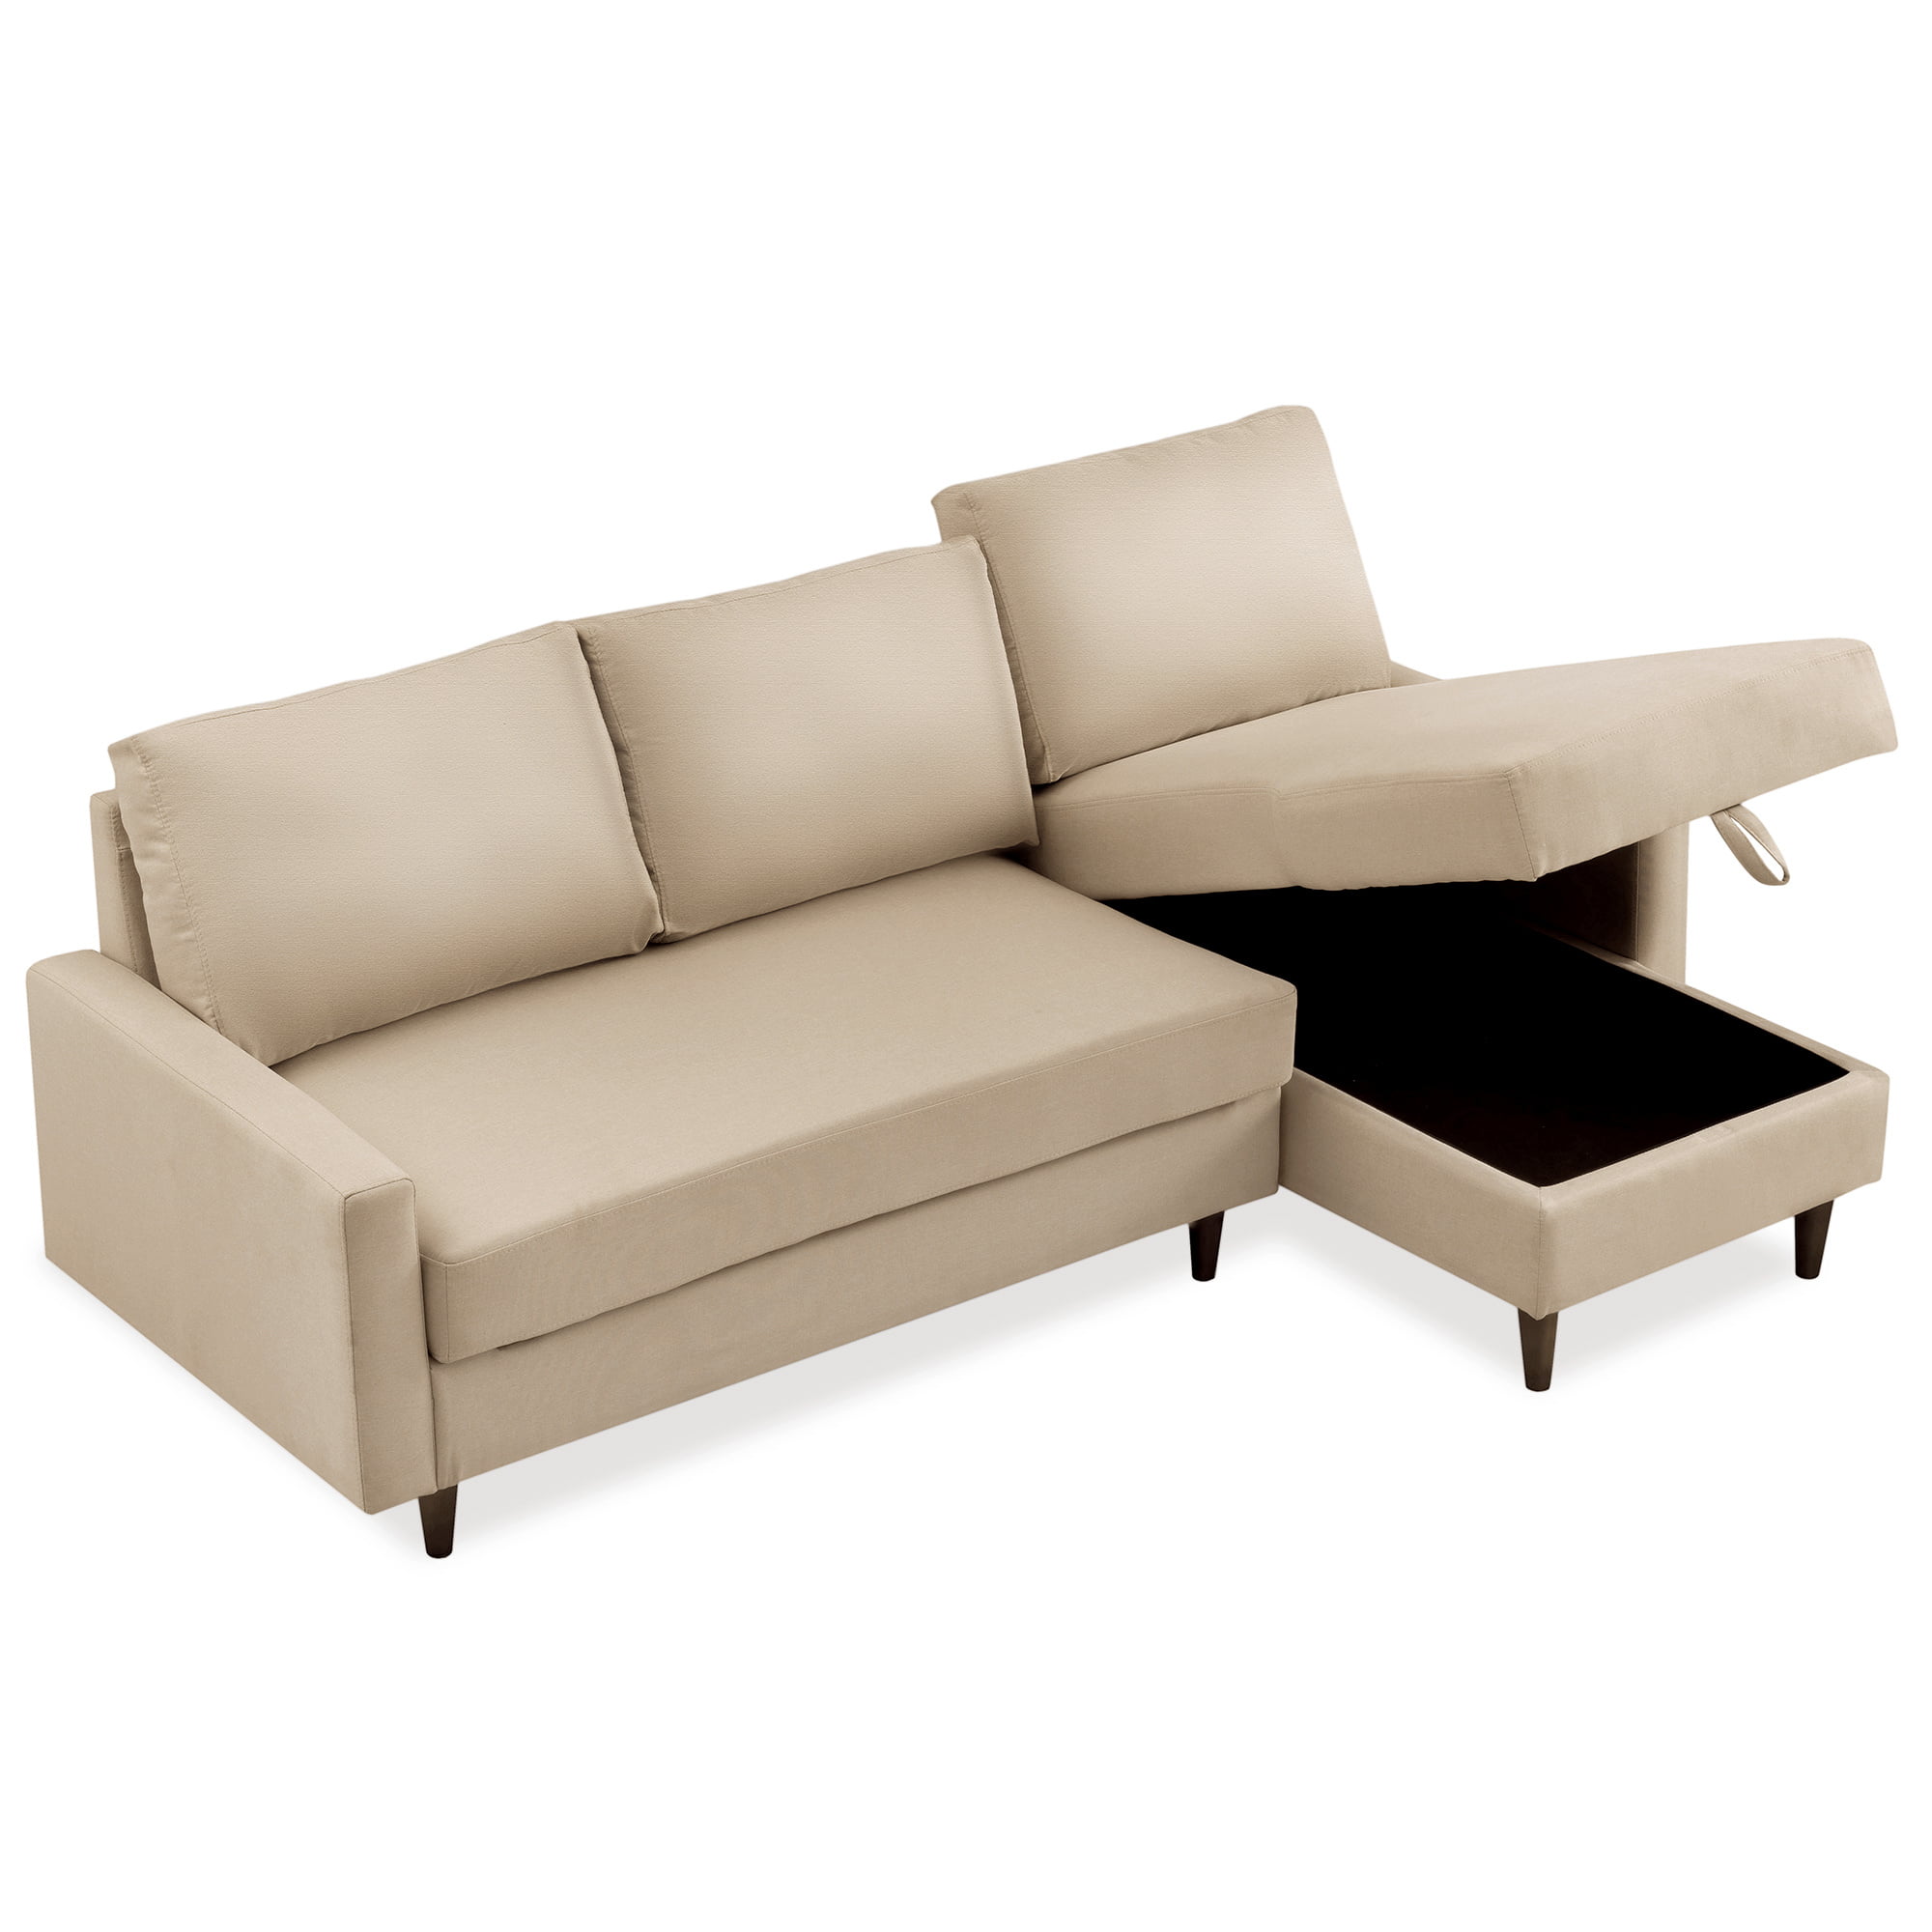 84 50 5 35 Pull Out Sleeper Sectional, Small Corner Sofa Bed With Storage